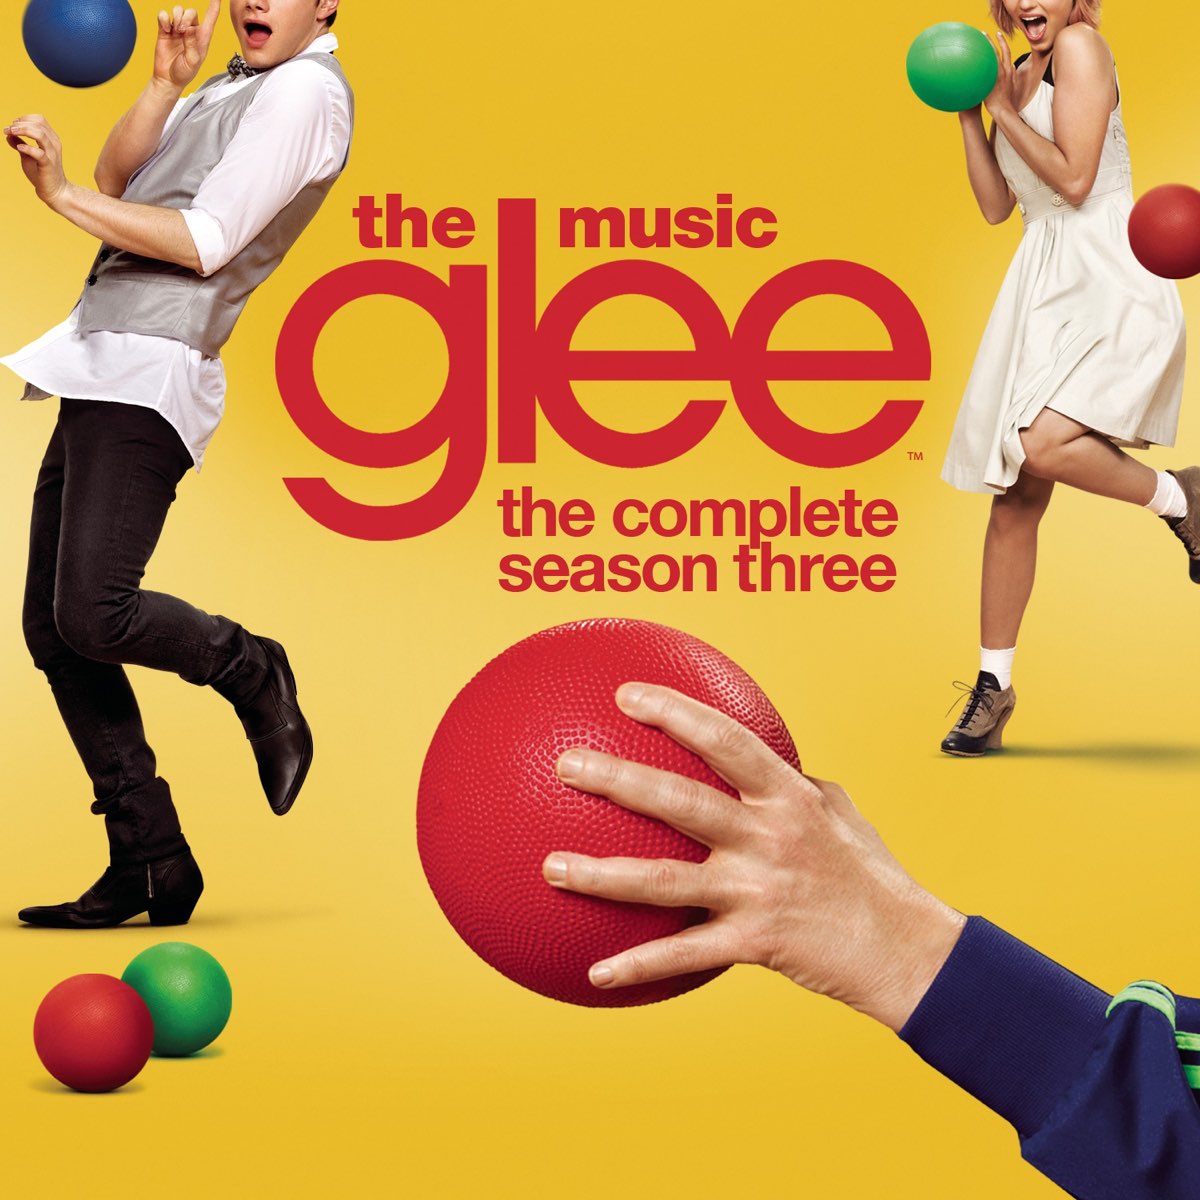 ‎Glee: The Music - The Complete Season Three by Glee Cast on Apple Music